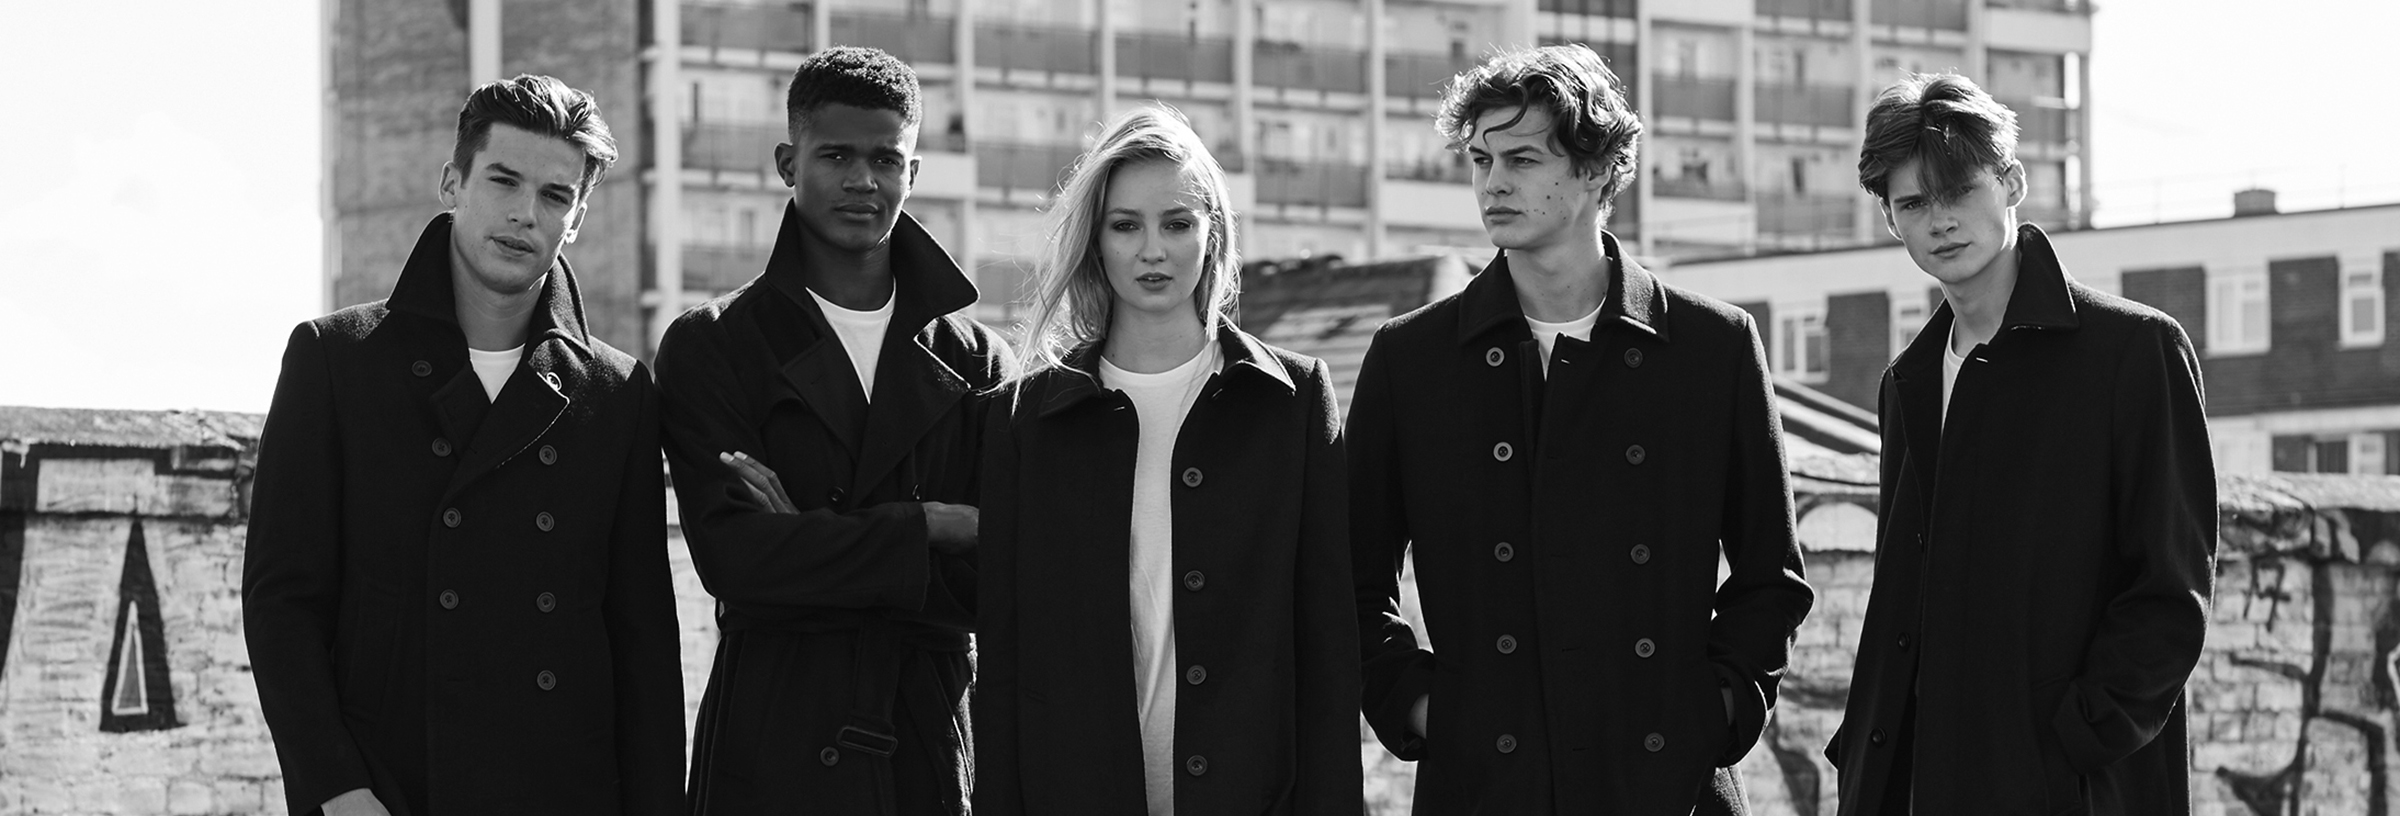 4 male models and 1 female model wearing black and white rustic clothing standing at a block of deserted flats